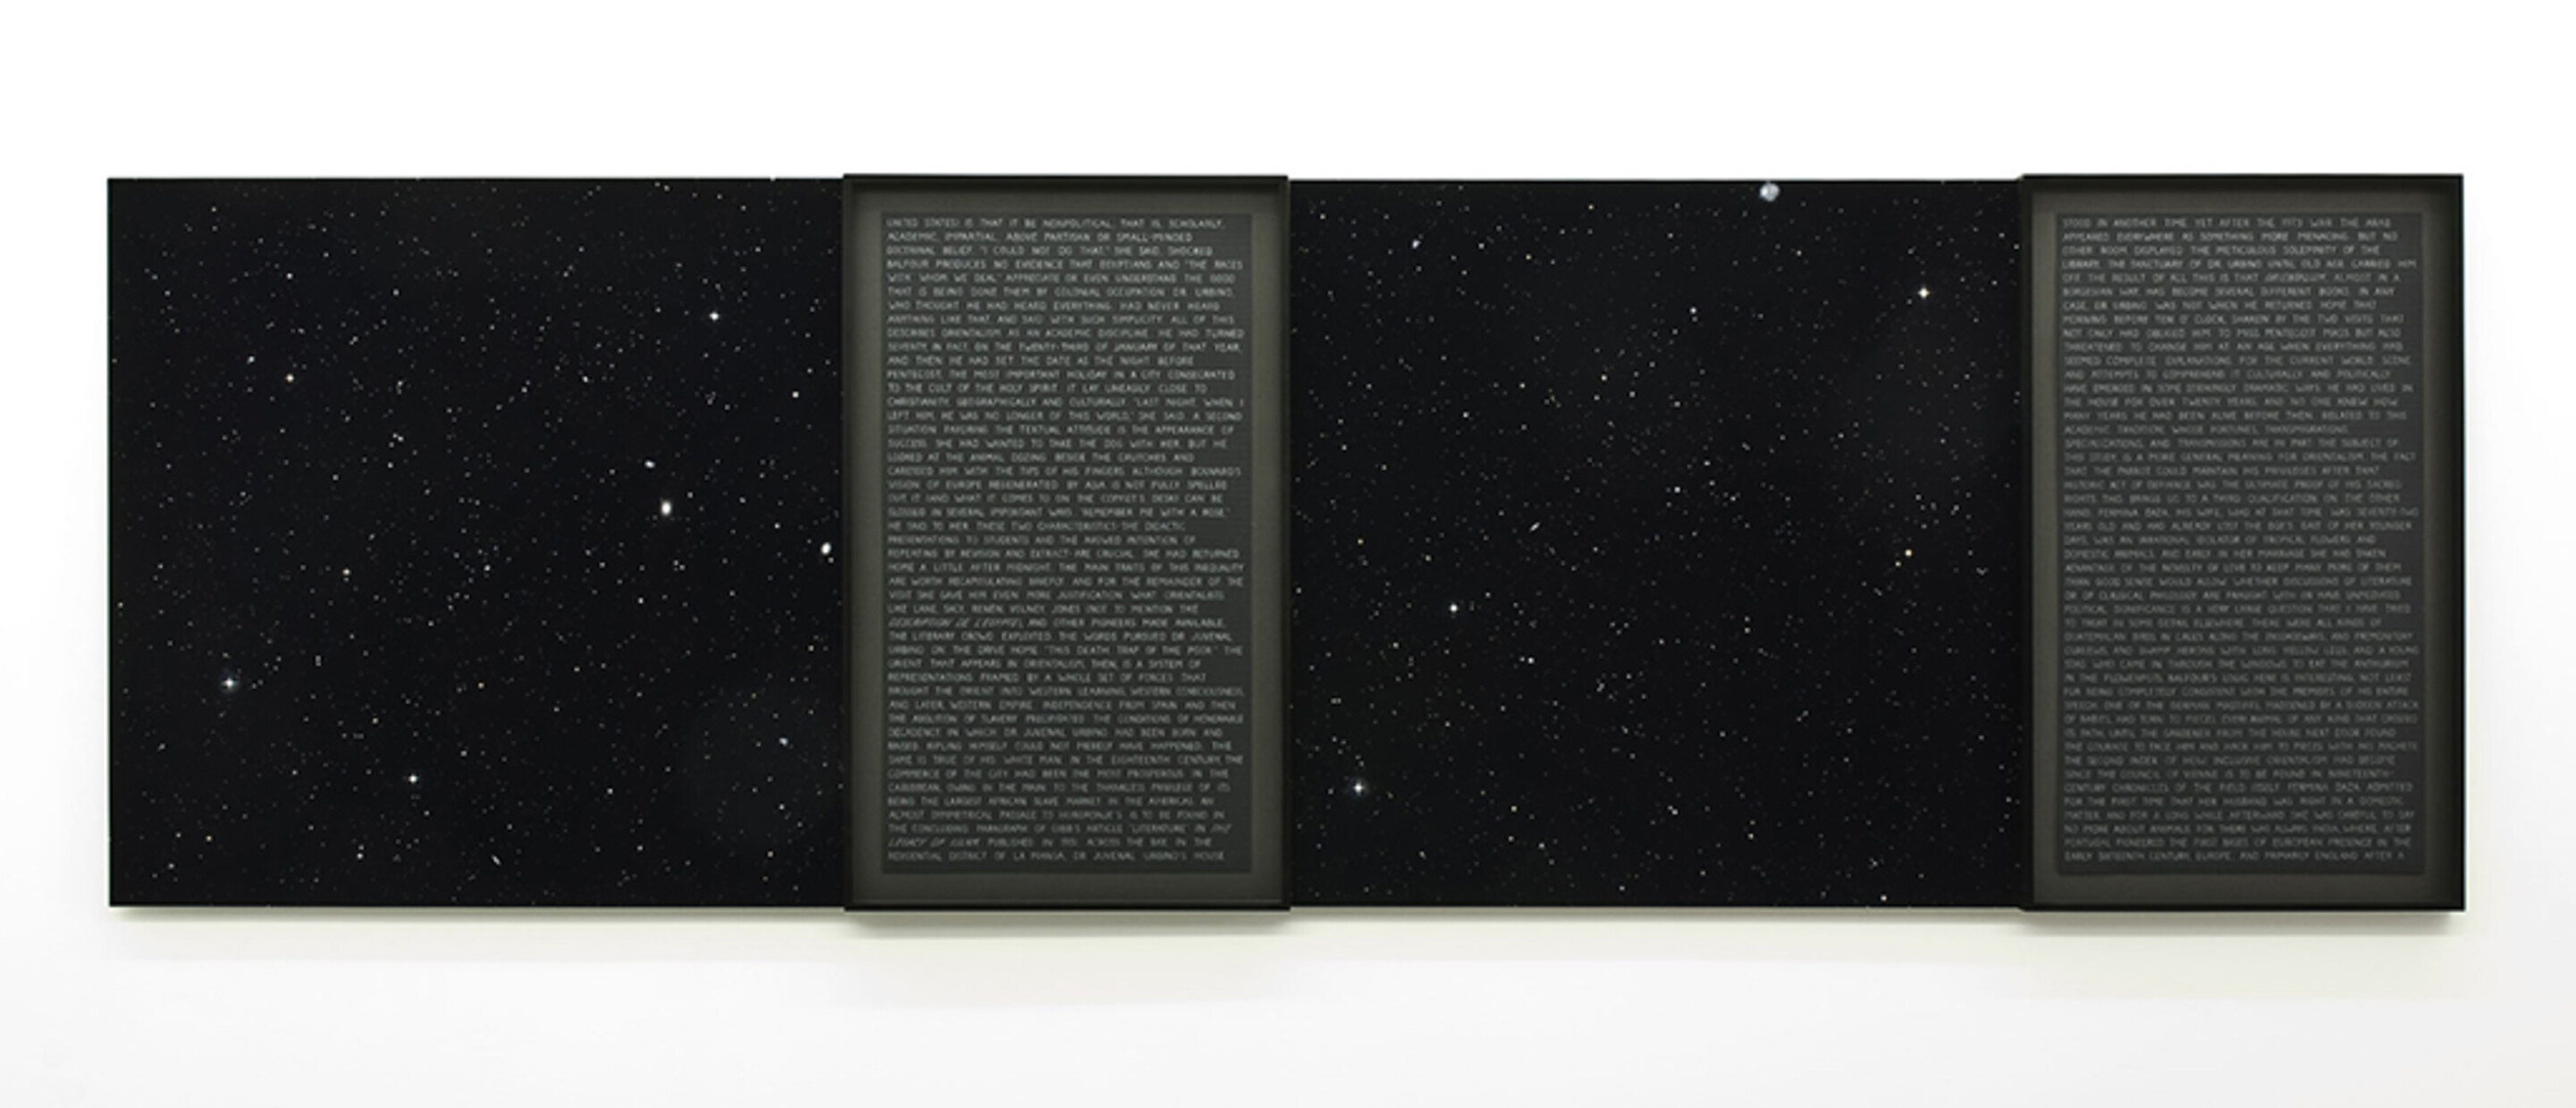 History of Stars 6 - 7, 2007 C-Print mounted on aluminum, and Pencil on paper Four parts, two 40" x 40" each, two 40" x 24" each Gallery Inventory #GAI136.01 Courtesy of Susanne Vielmetter Los Angeles Projects; Photo credit: Robert Wedemeyer